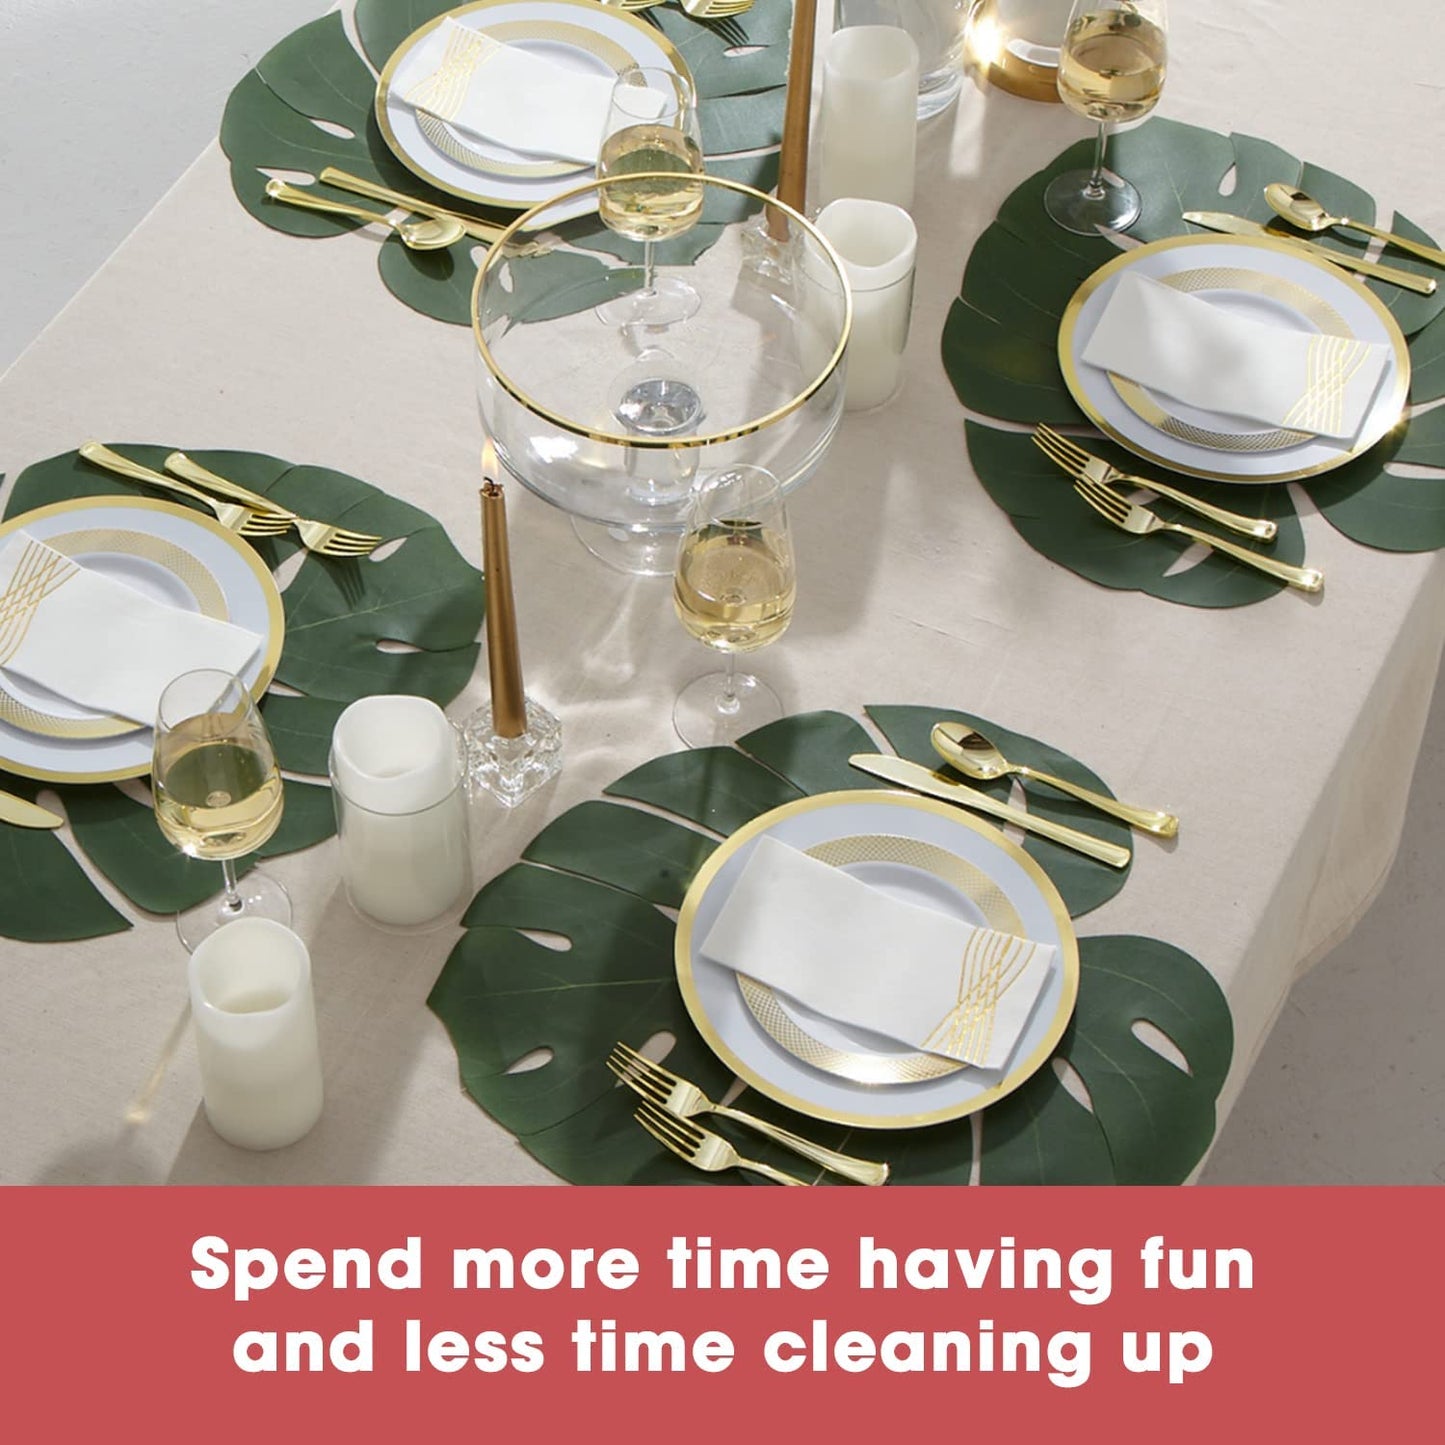 PREMIUM PLATE SETS FOR 30 GUESTS